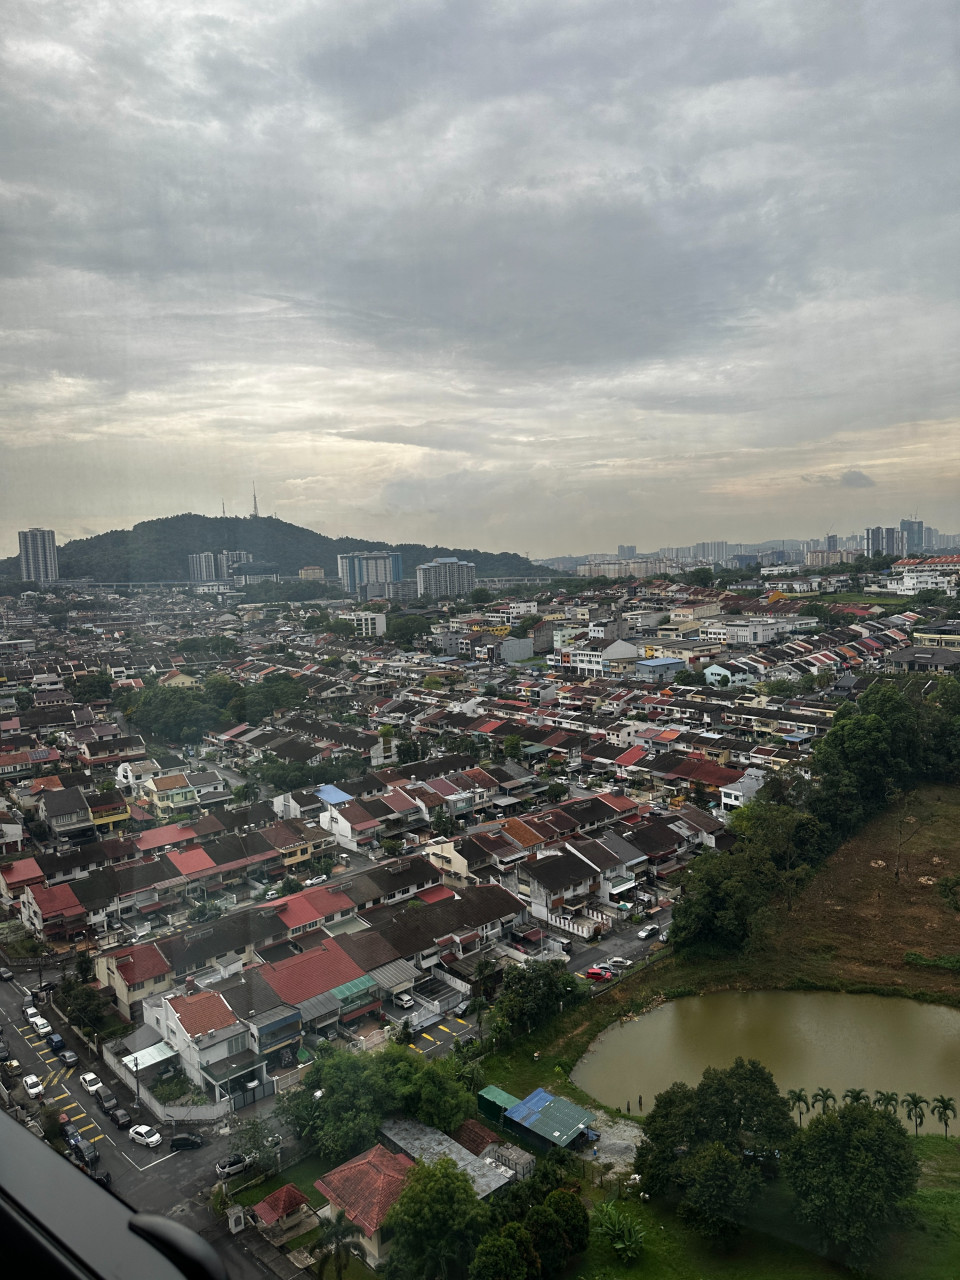 A view of the surrounding area on a particularly overcast day. – Haikal Fernandez pic